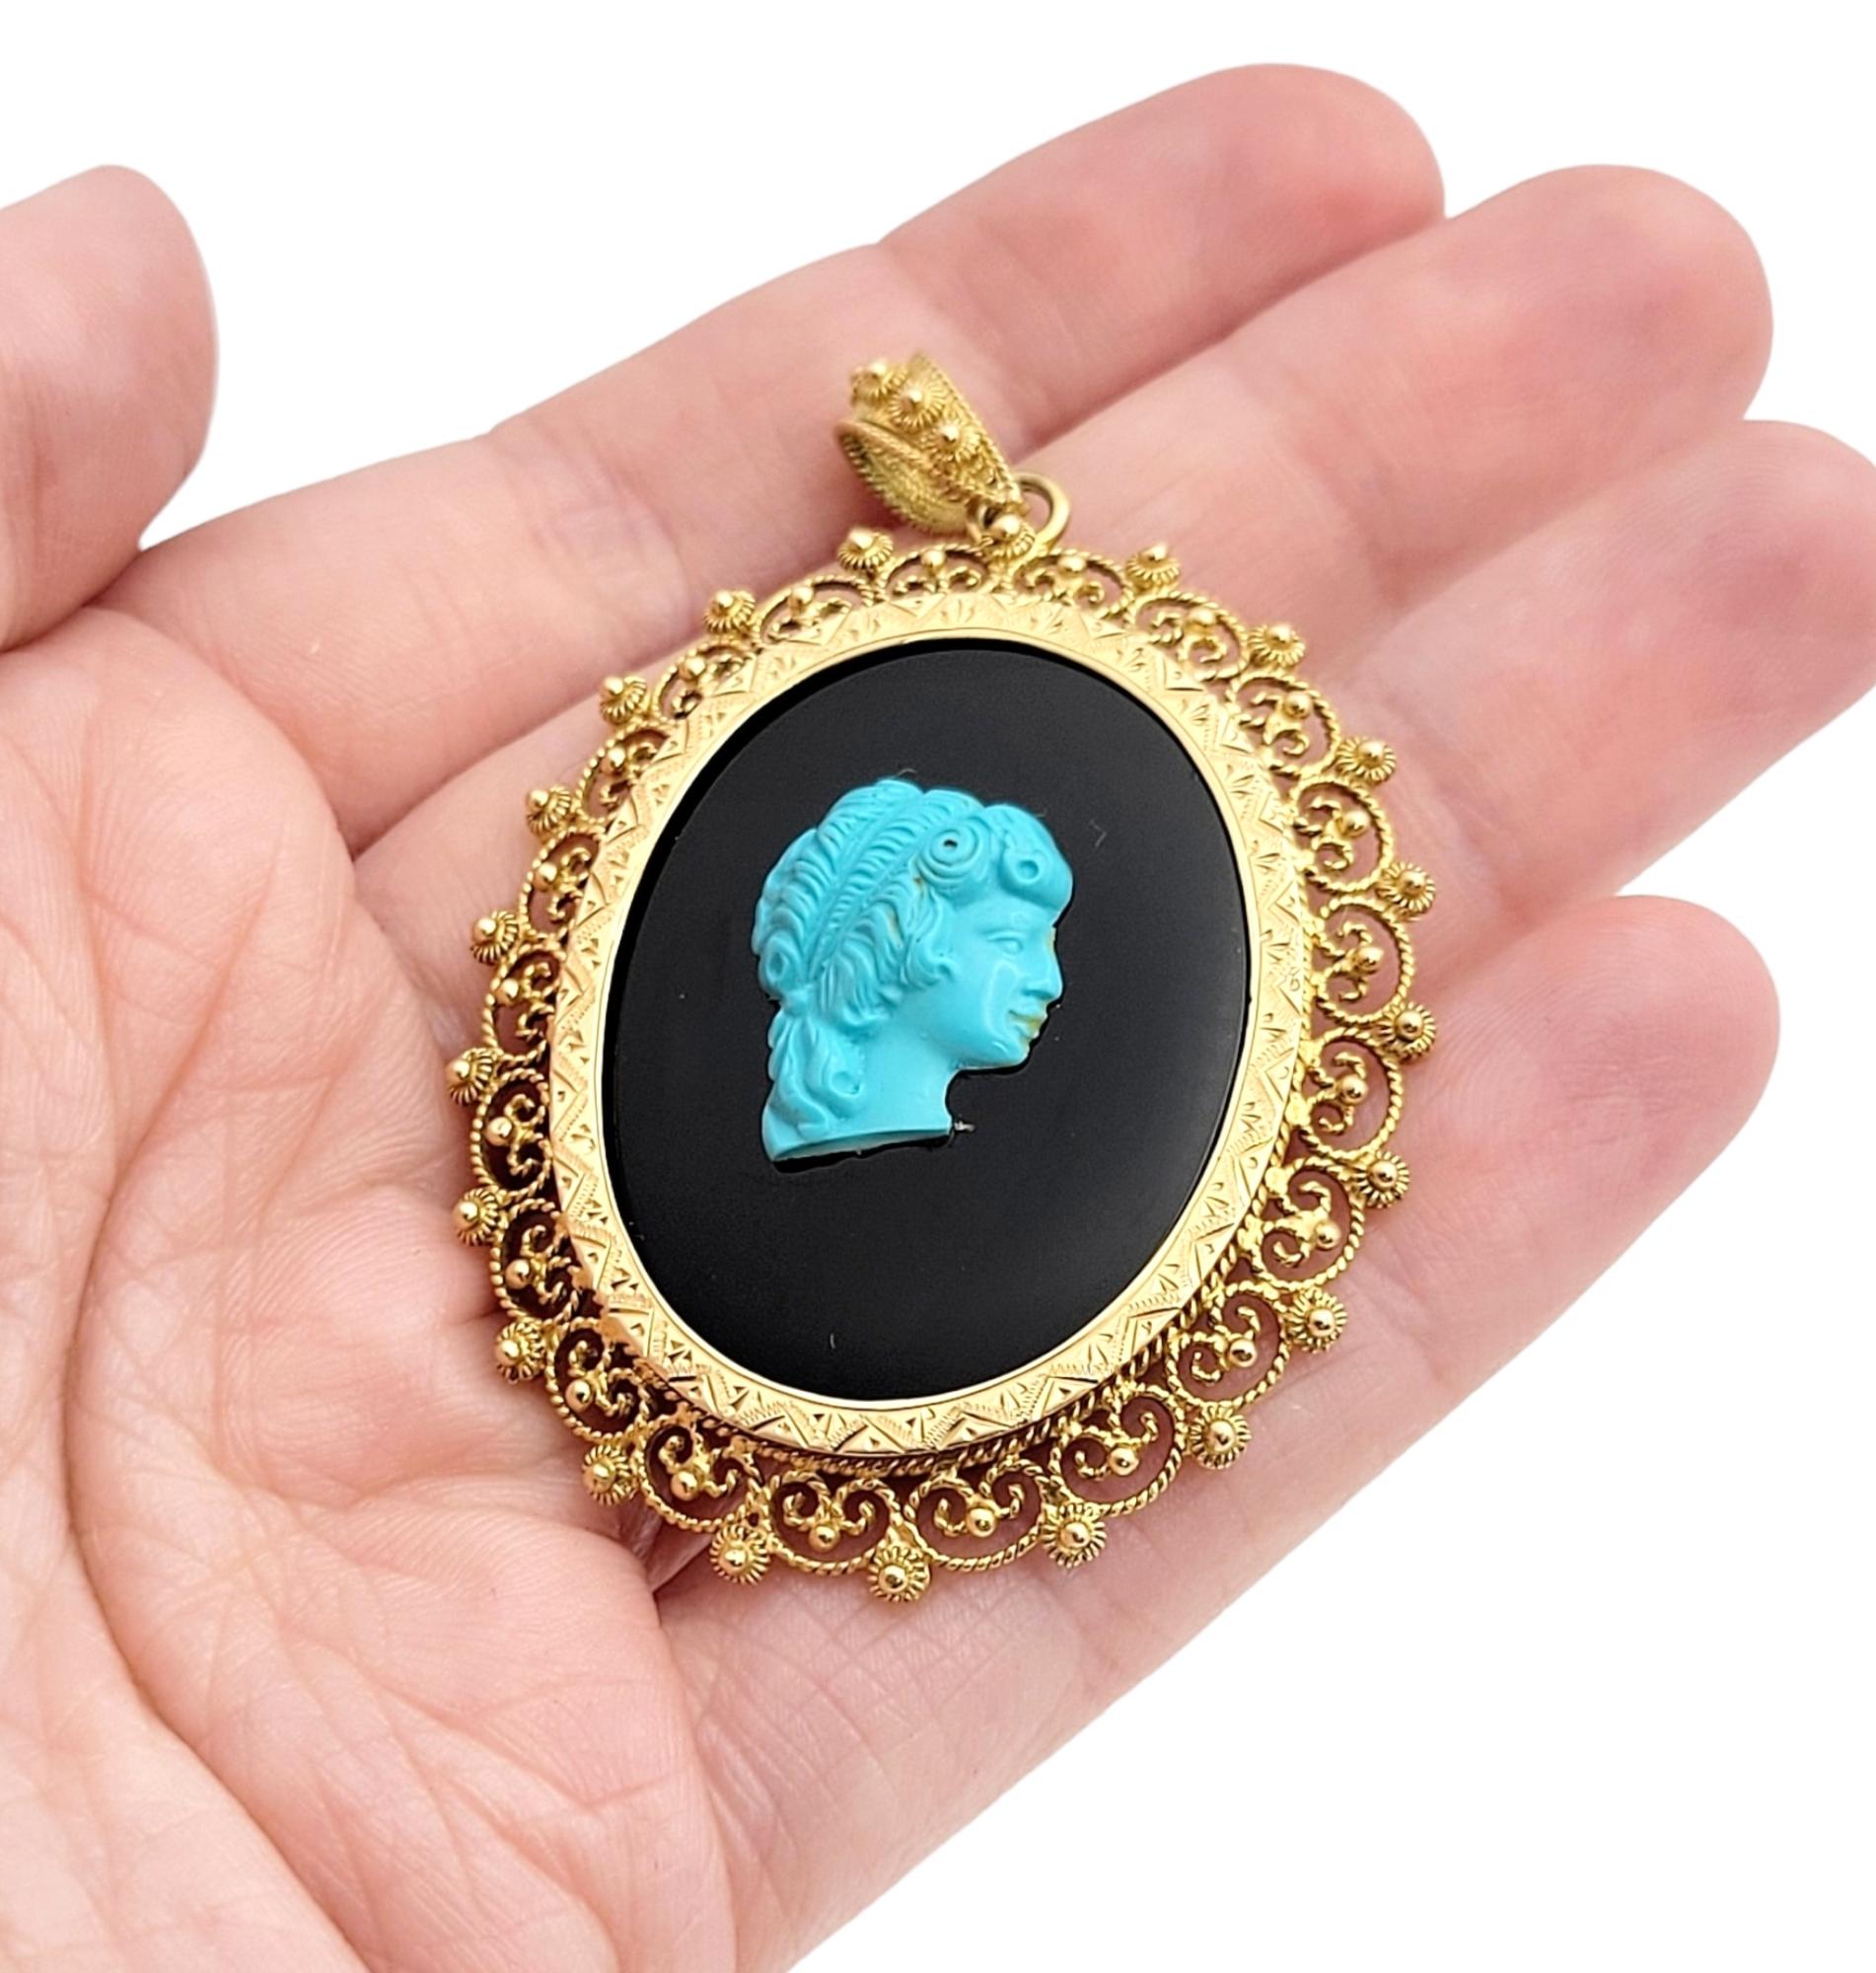 Turquoise & Onyx Victorian Lady Cameo Oval Pendant Set in 14 Karat Yellow Gold  For Sale 4